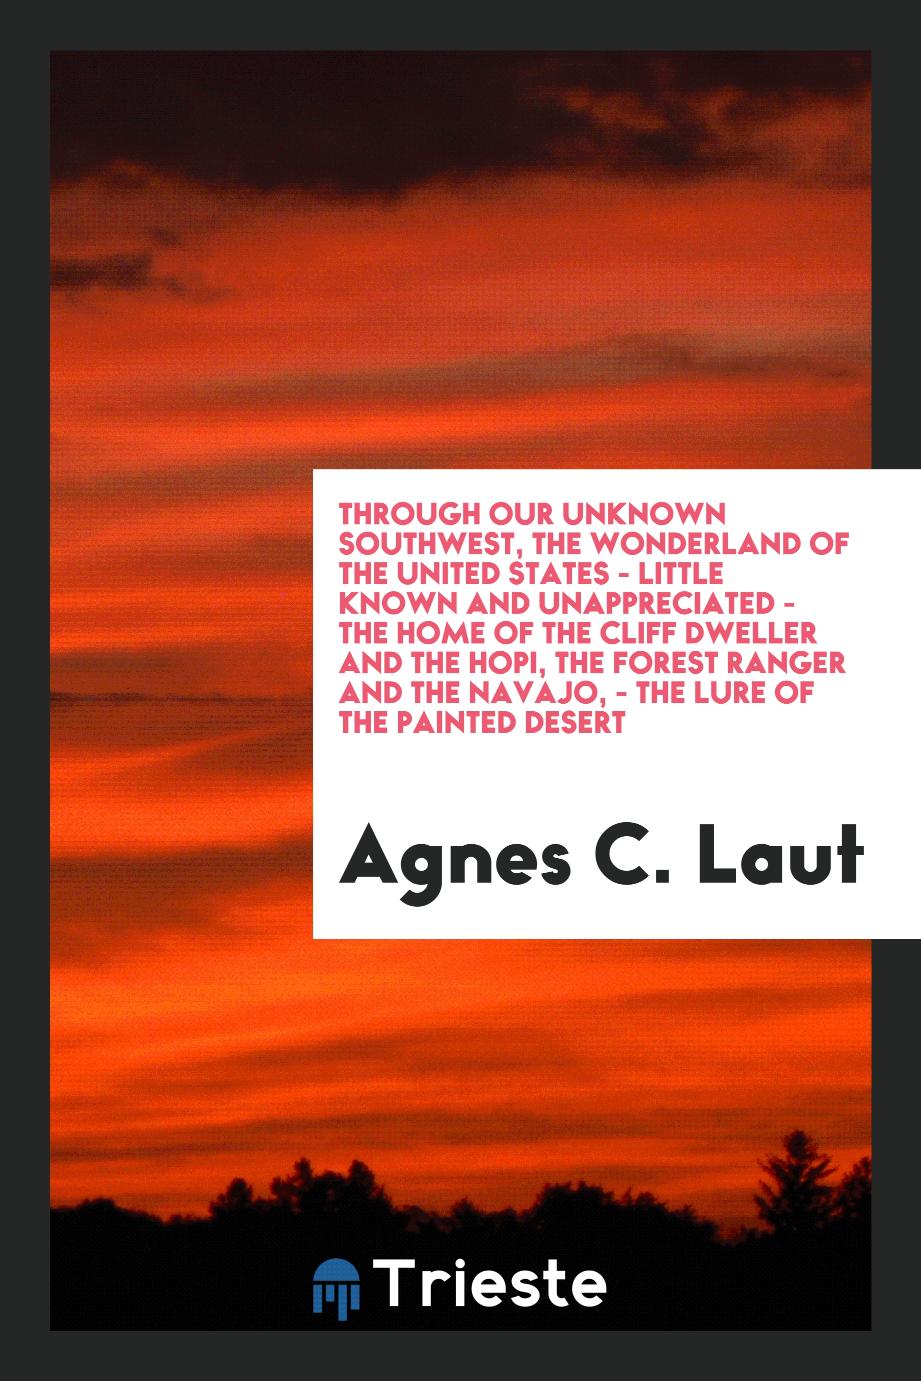 Through Our Unknown Southwest, the Wonderland of the United States - Little Known and Unappreciated - the Home of the Cliff Dweller and the Hopi, the Forest Ranger and the Navajo, - the Lure of the Painted Desert